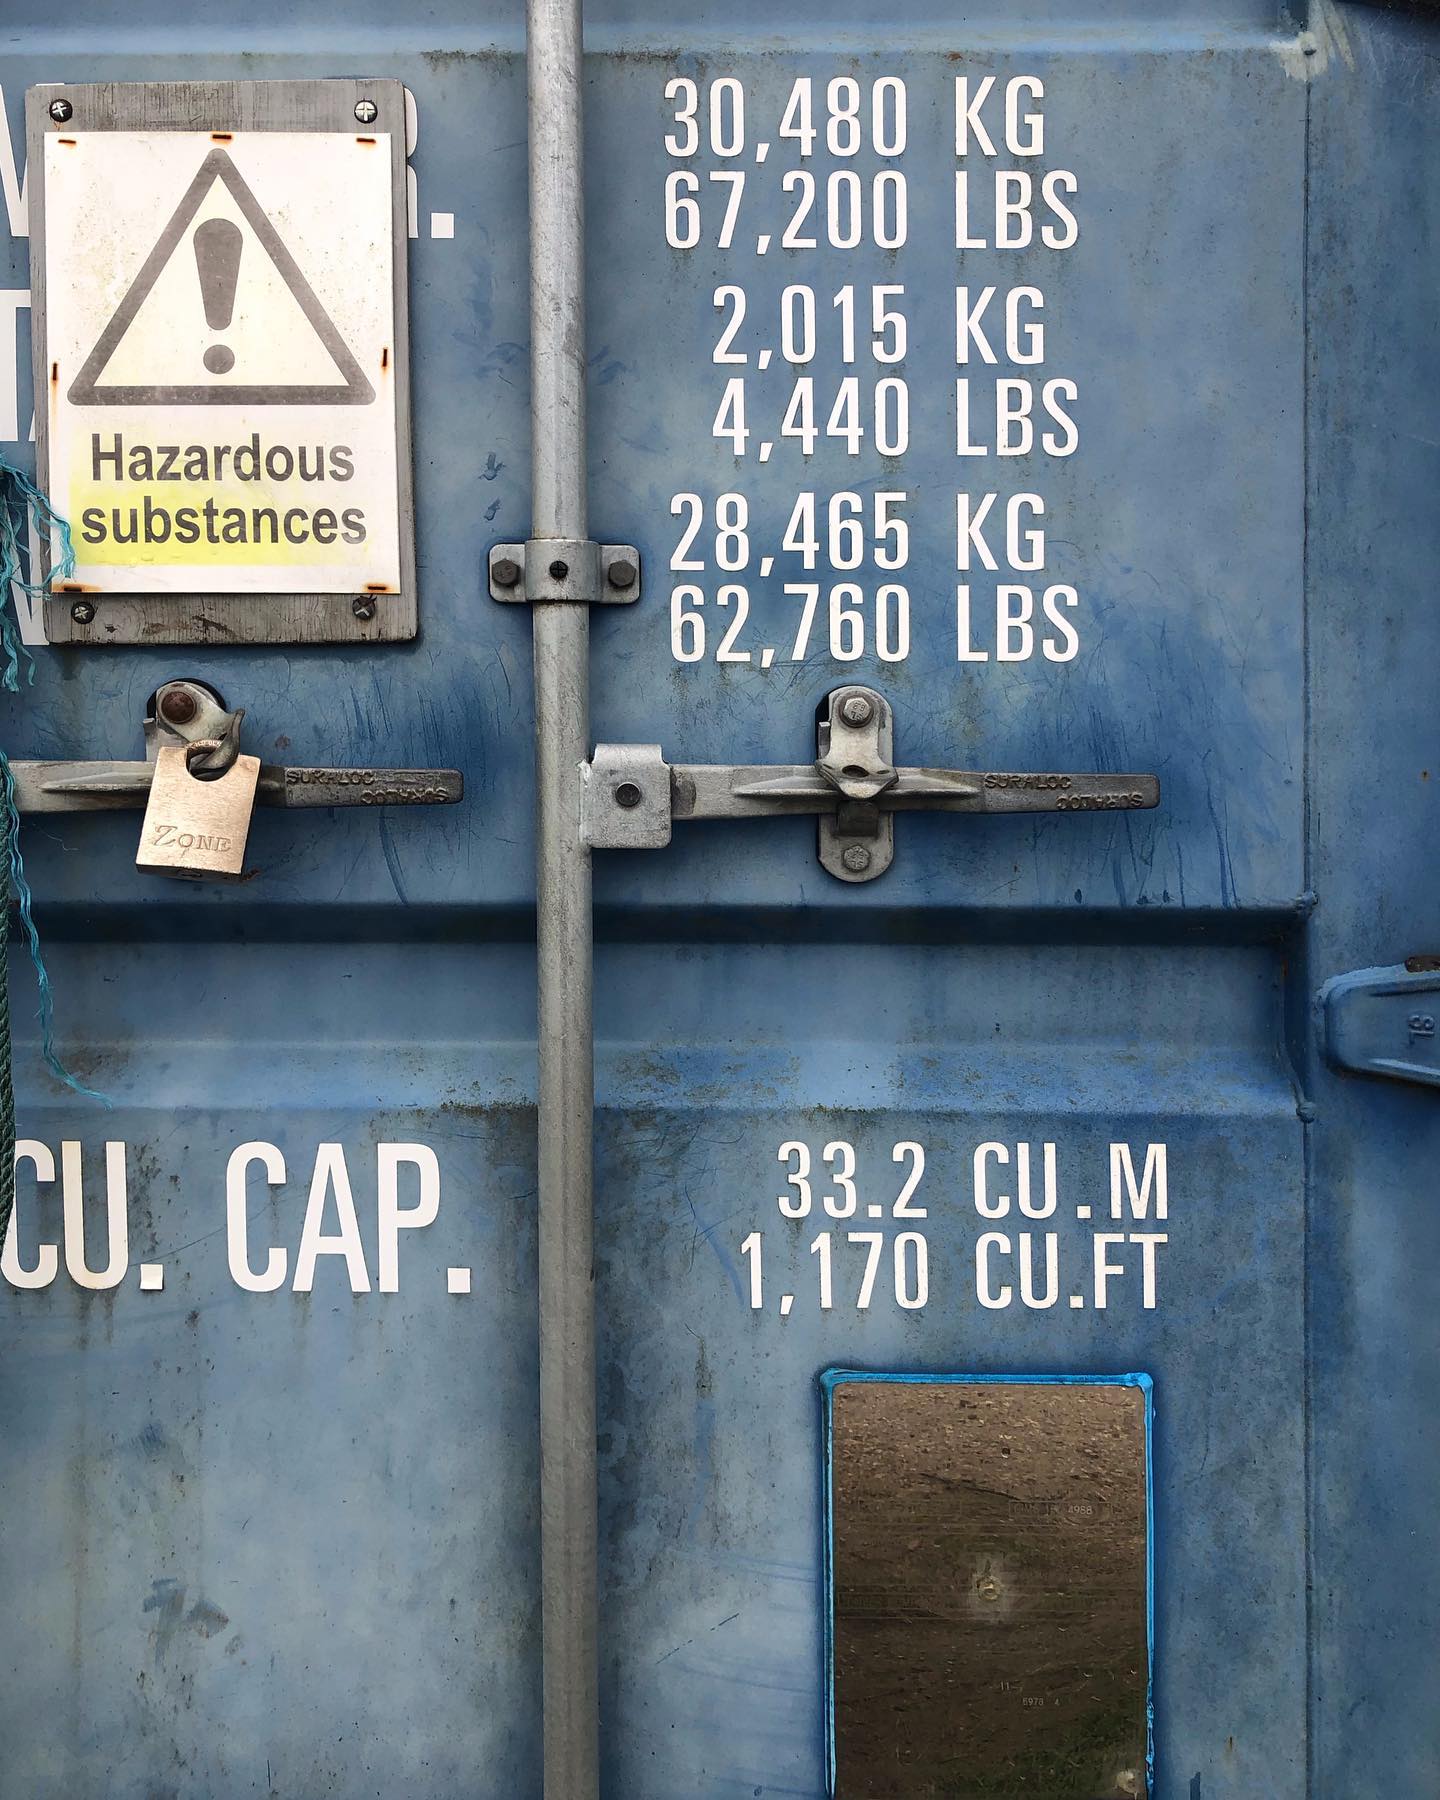 all the blues. a few greens. all contained. numbered and weighed. king edward’s mine, camborne. 

#container, #containerphotography, #imageworks, #imagecontained, #contained, #containedphotography,